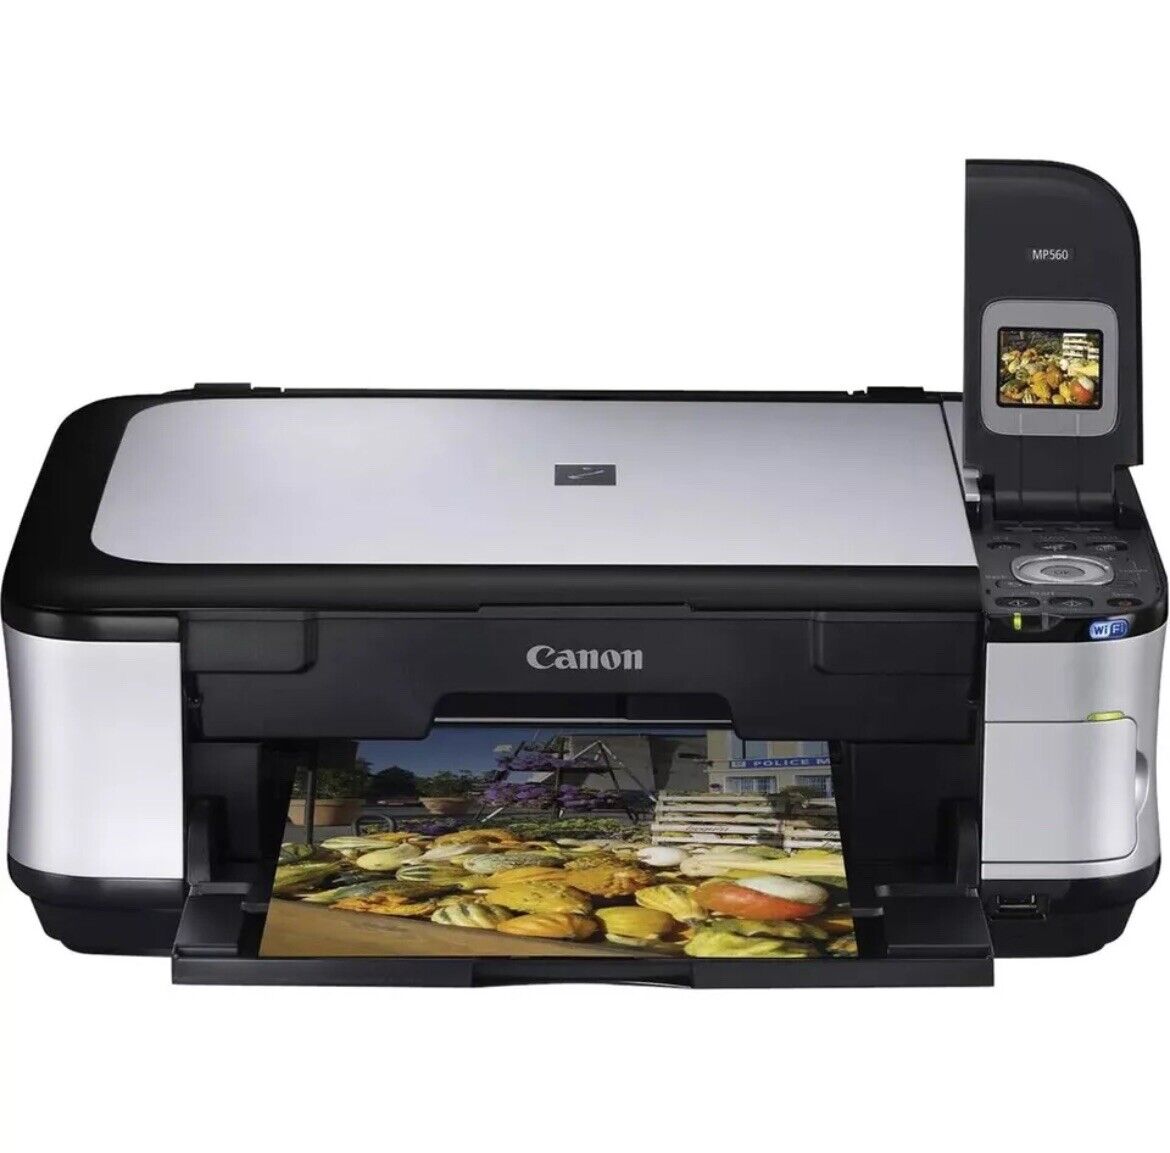 Canon PIXMA MP560 All-In-One Inkjet Printer, New (open box, but never used)